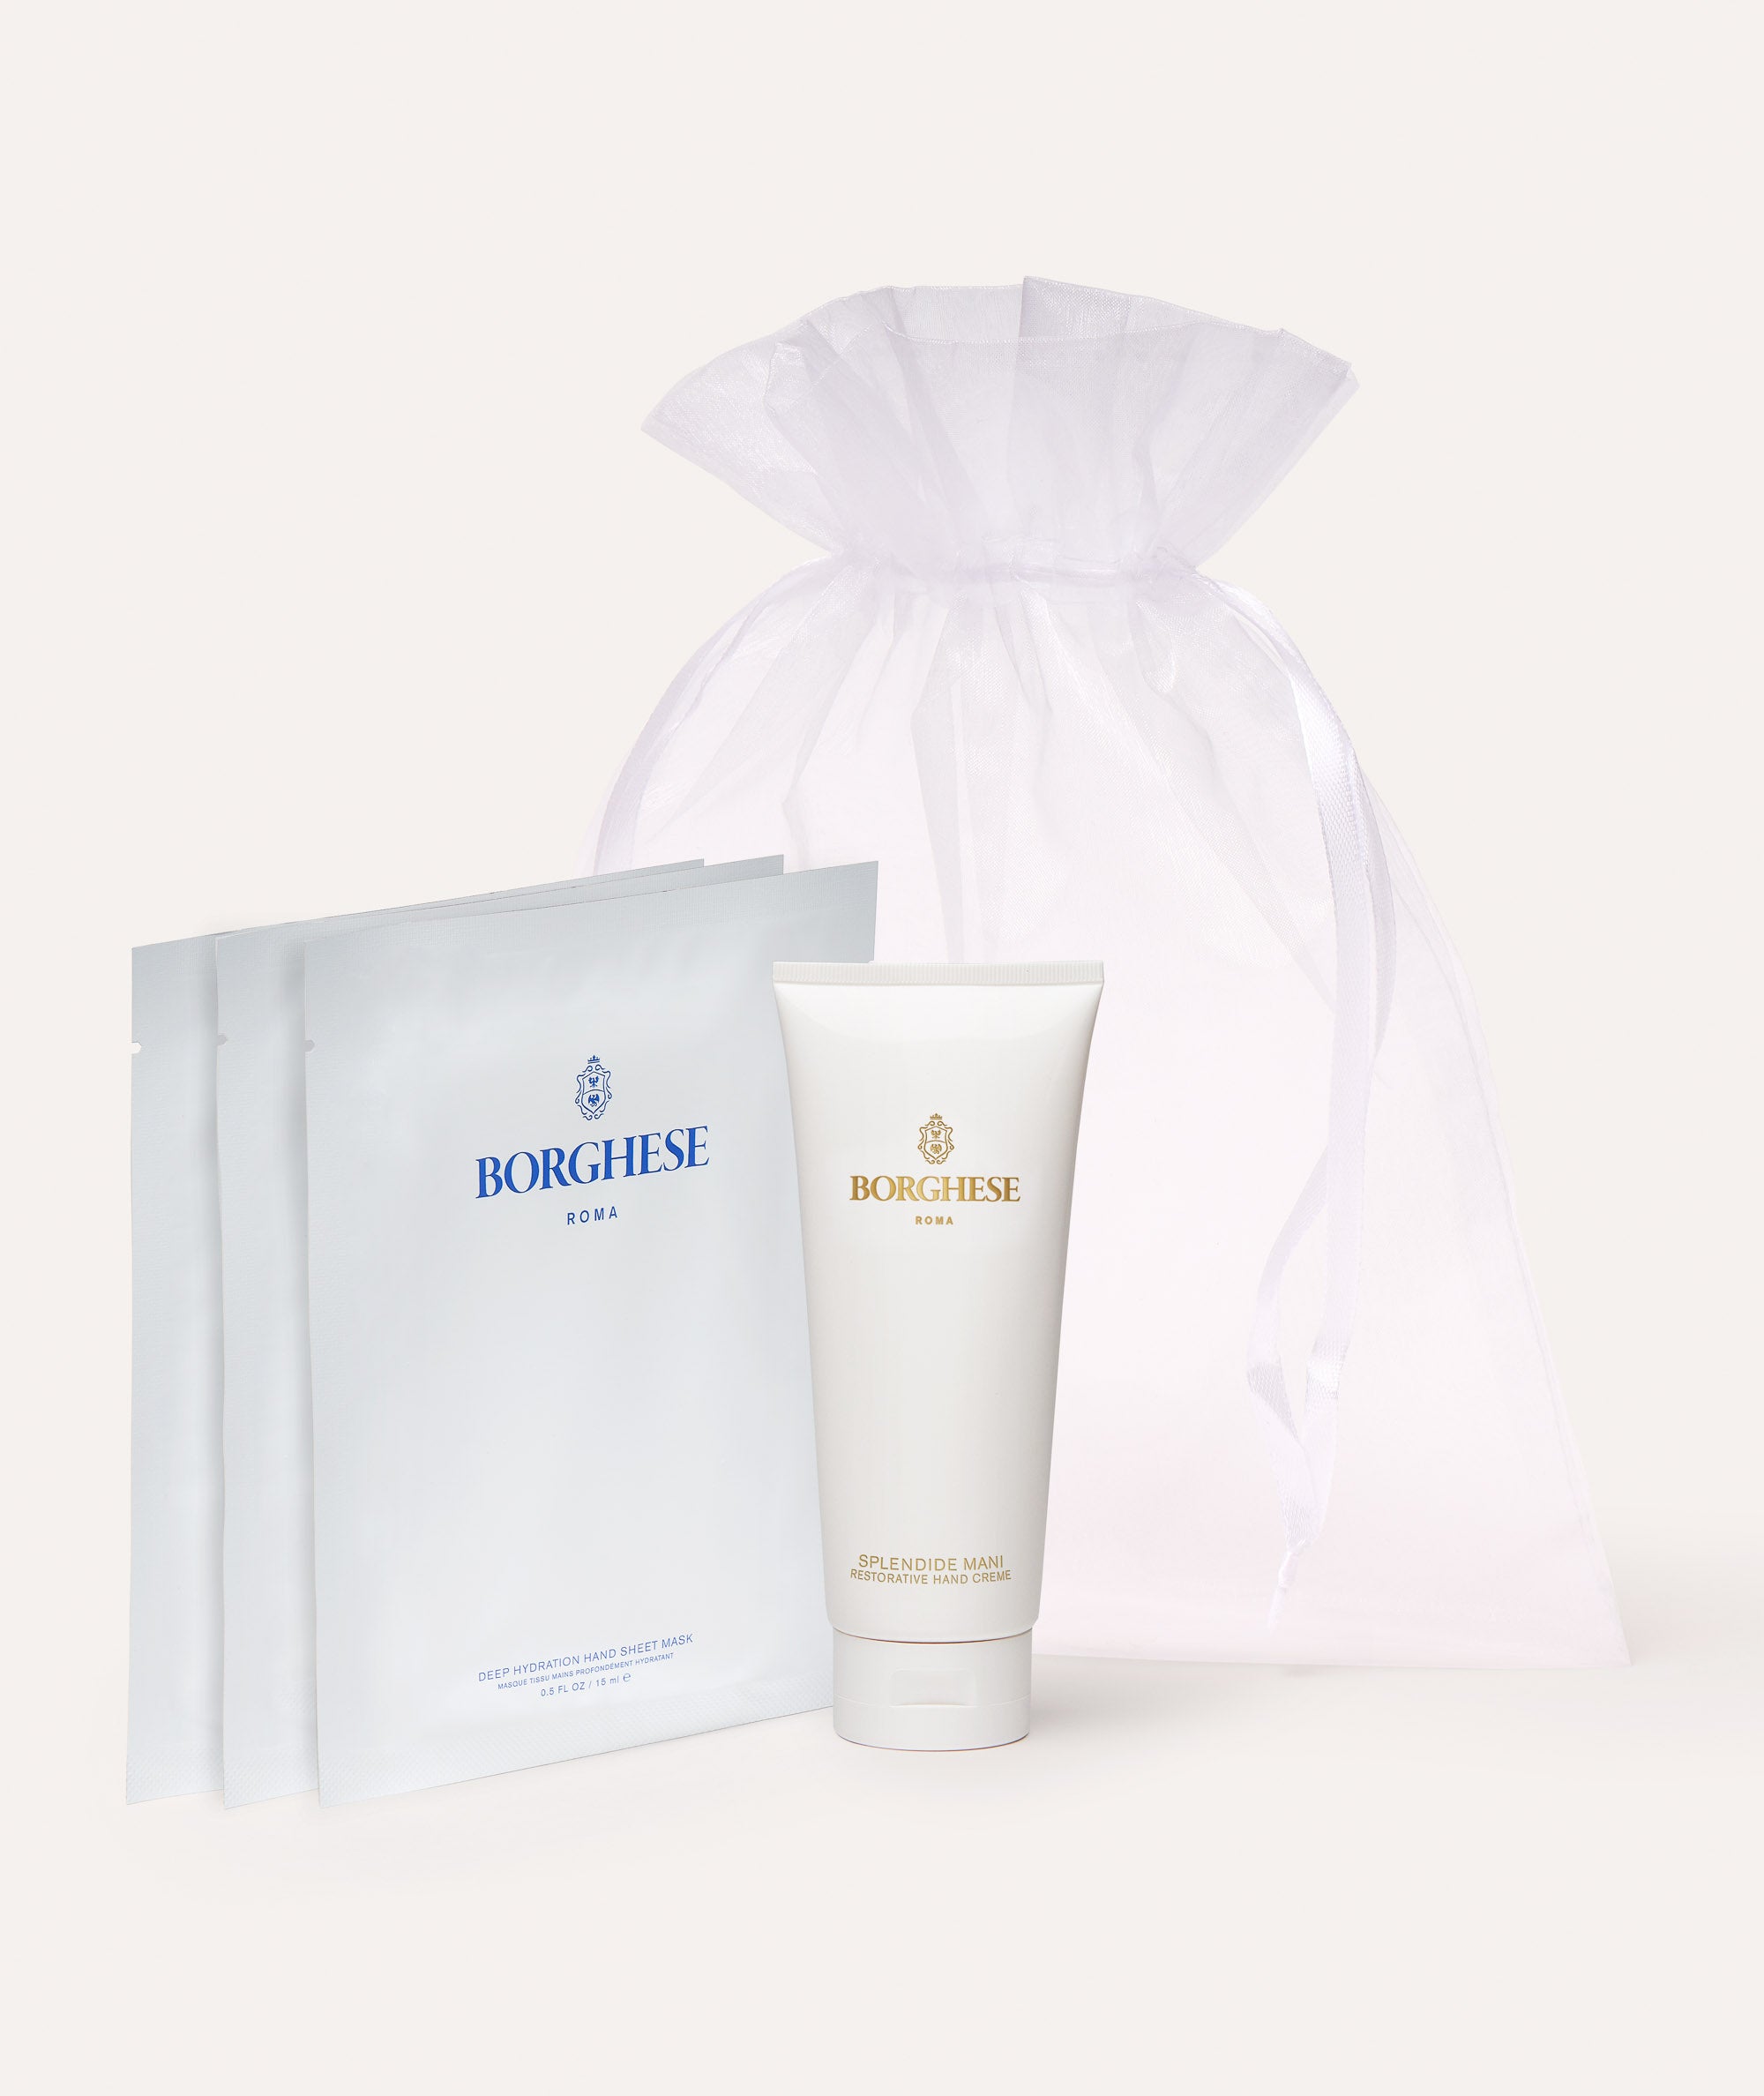 The Borghese Roma Hand Care Set includes a Splendide Mani Restorative Hand Creme and 3 Deep Hydration Hand Sheet Masks in a white organza bag